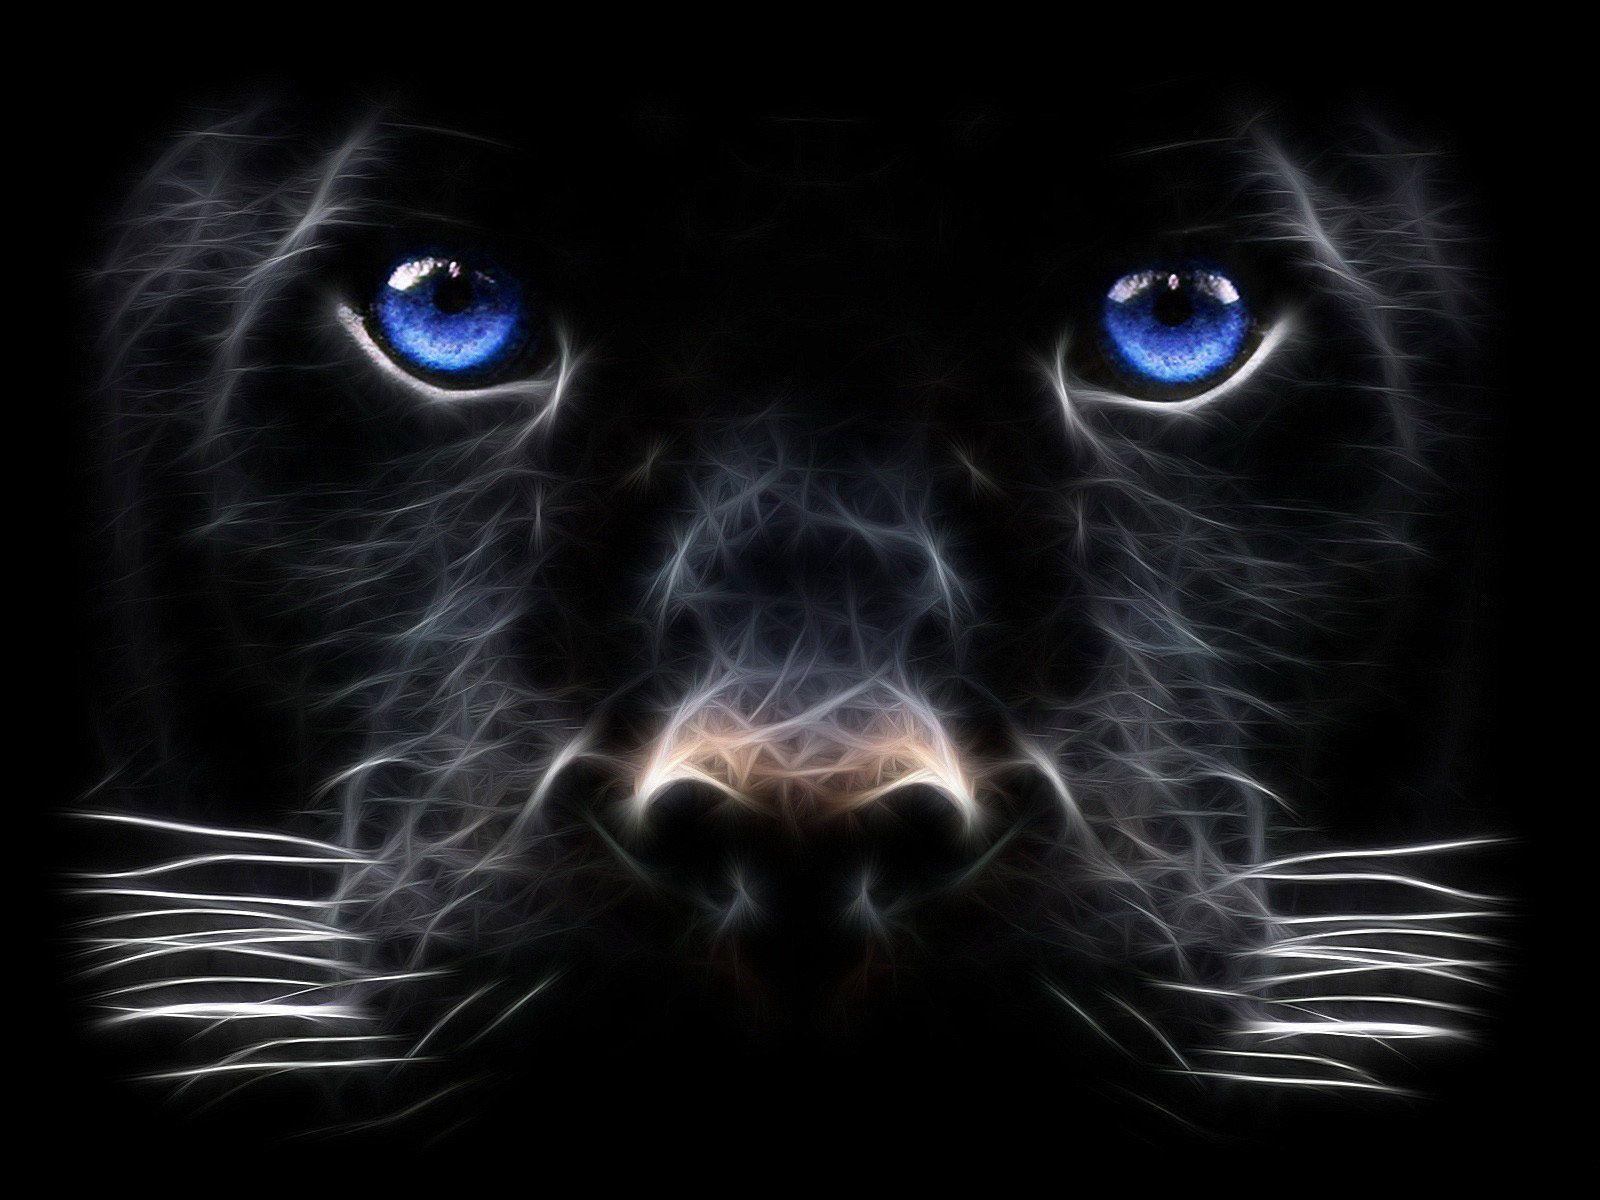 My Top Collection: Big cat wallpaper